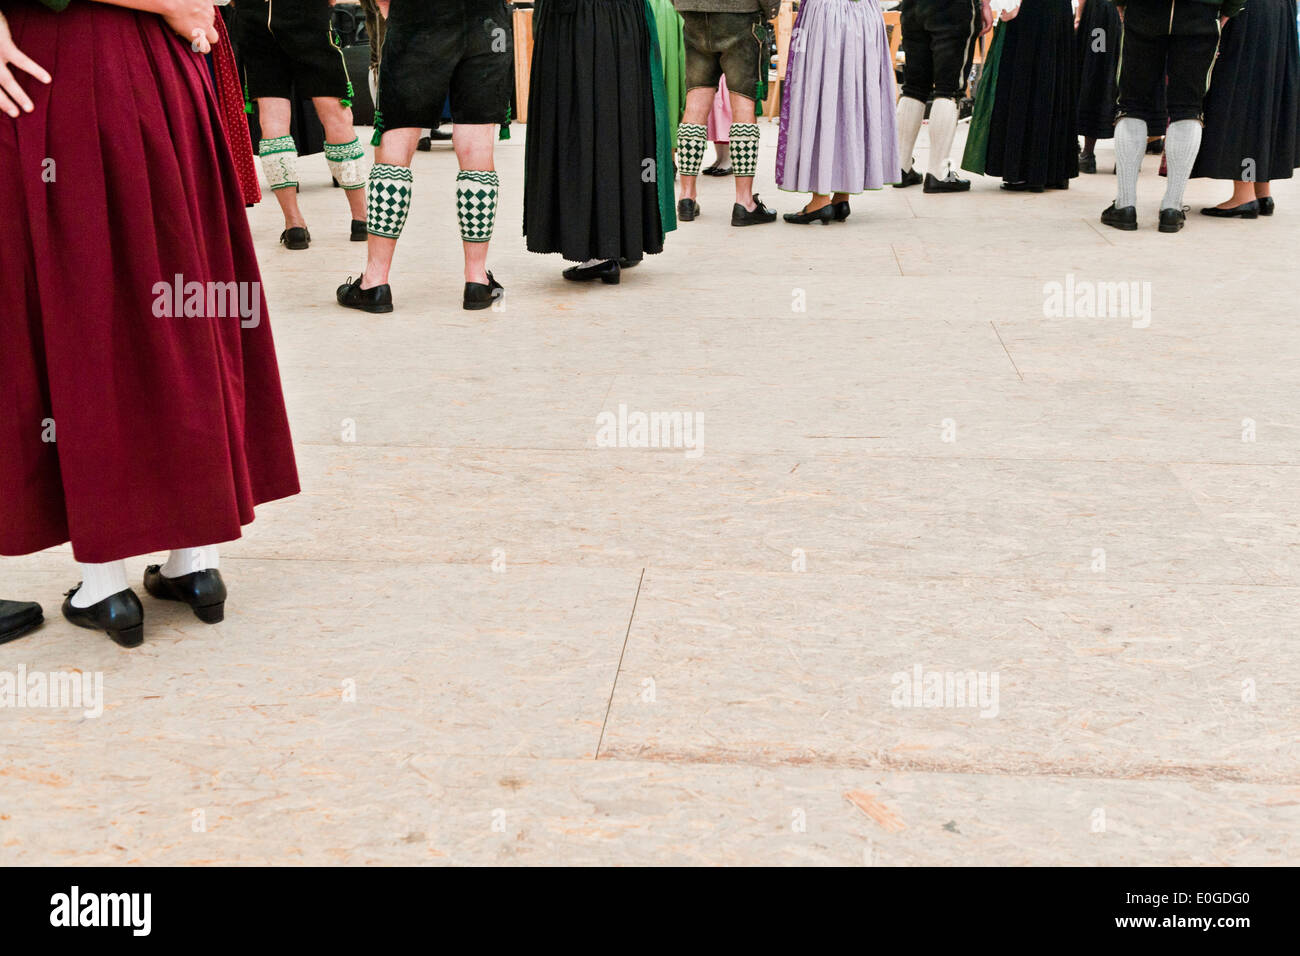 Men and women dancing at a festival, Christening of a bell, Antdorf, Bavaria, Germany Stock Photo